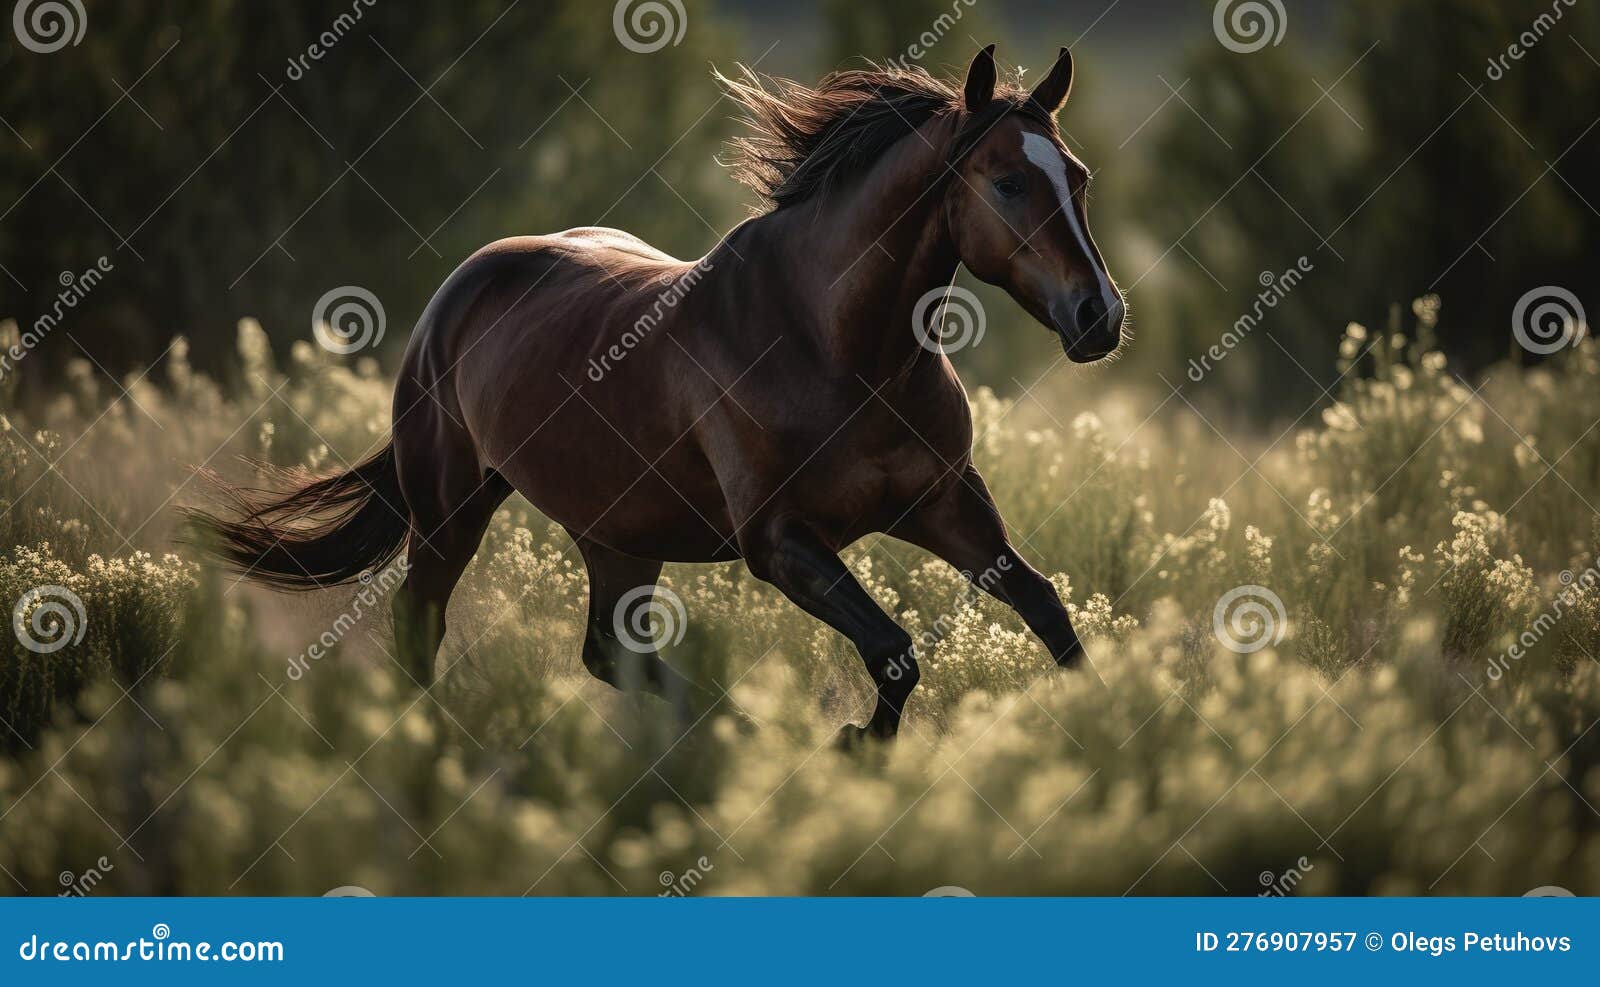 a brown horse running through a field of tall grass and flowers with trees in the backgrouds of the picture in the background